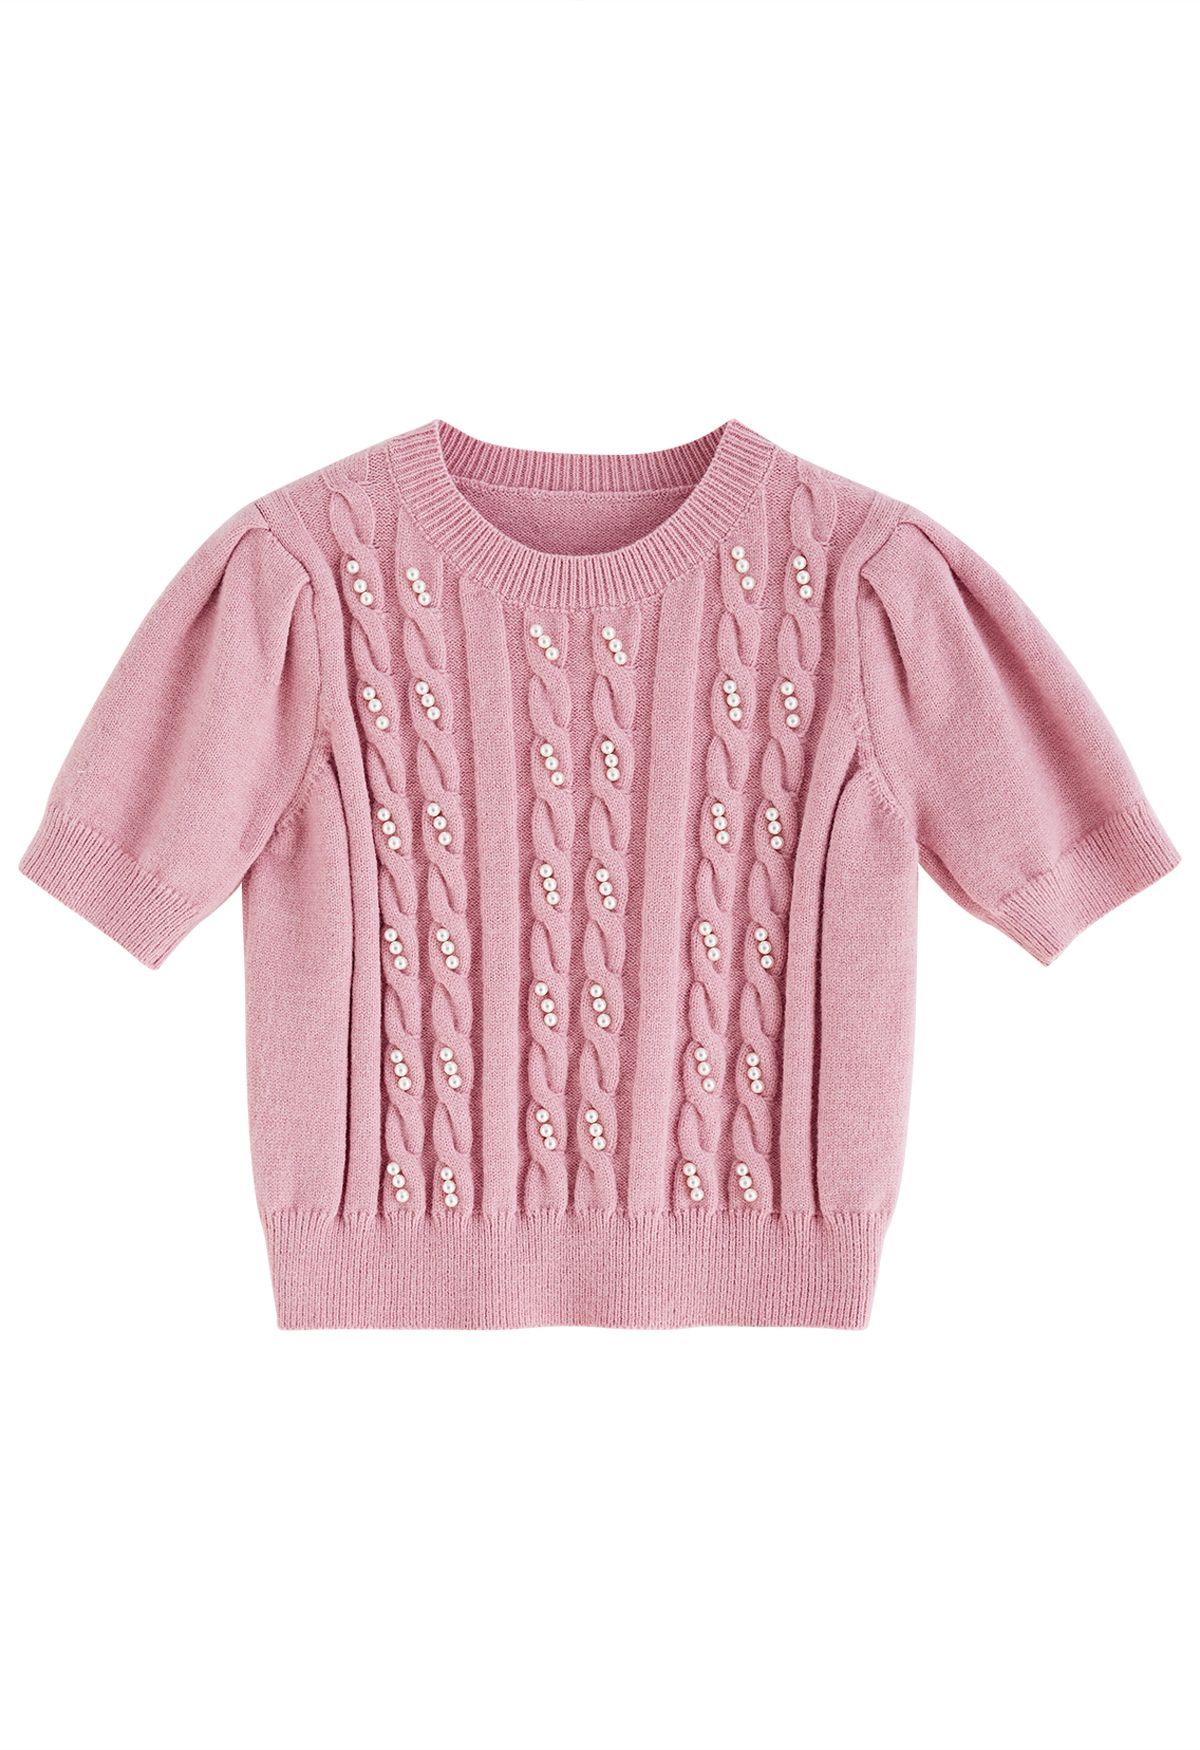 Pearl Embellished Braid Knit Top in Pink | Chicwish